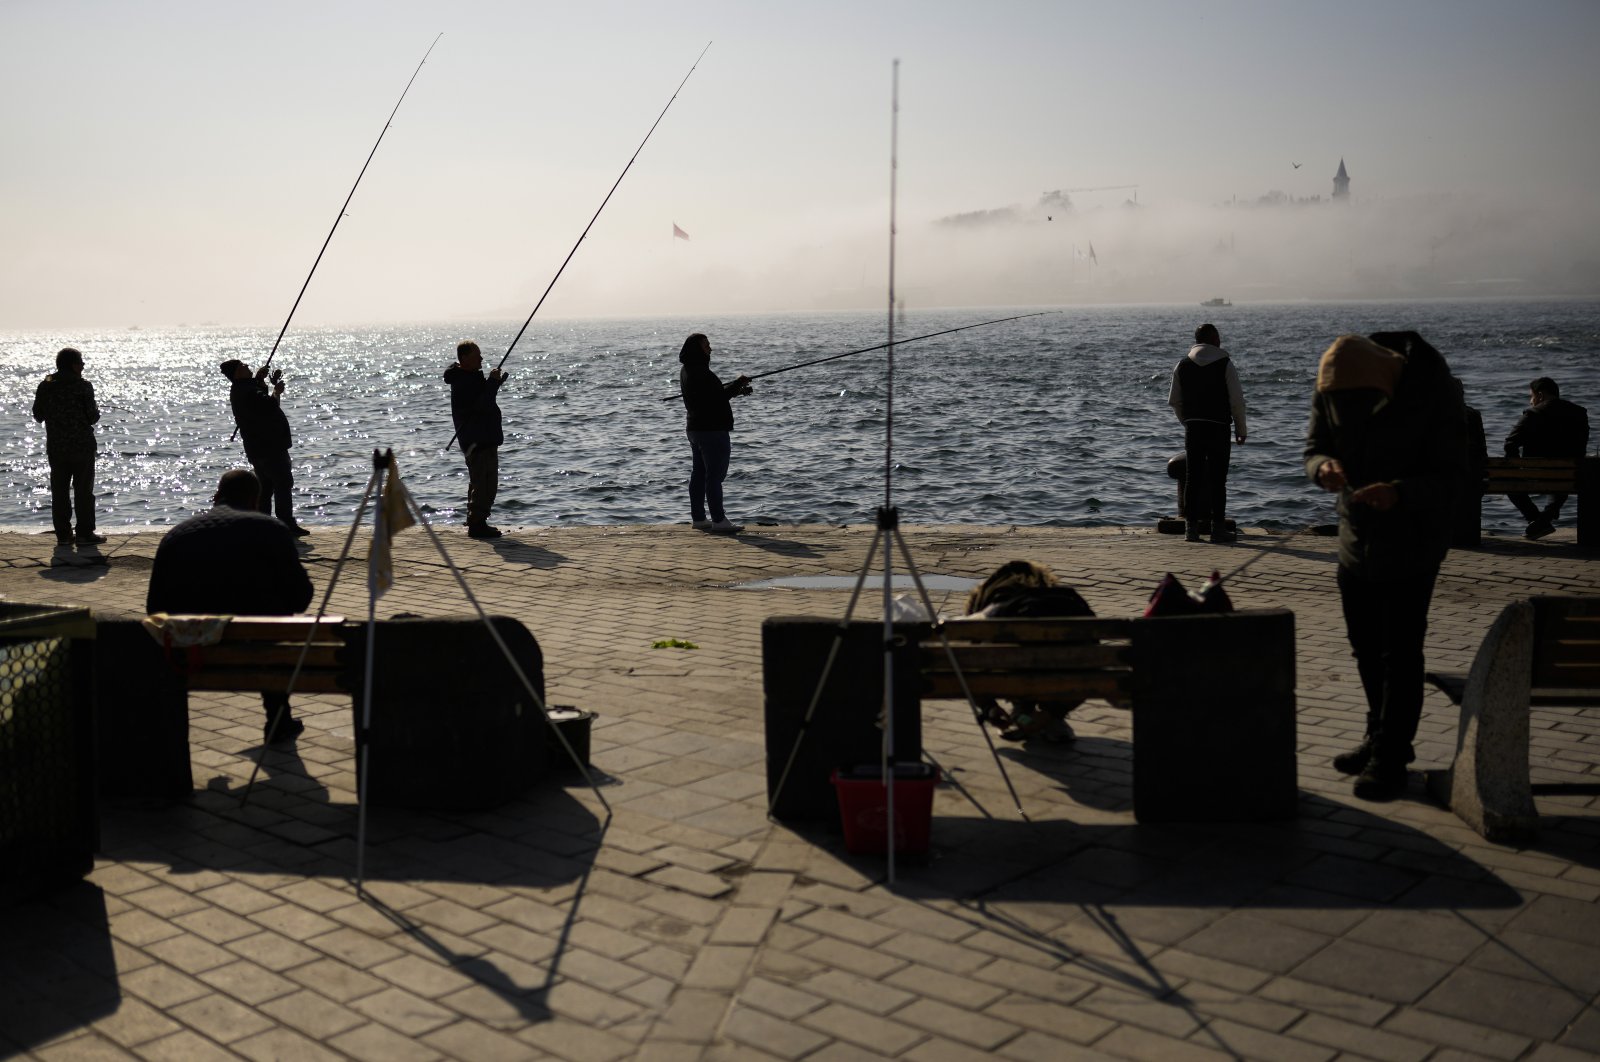 Fishermen cast their lines into the Bosporus at a promenade during a foggy morning in Karaköy, Istanbul, Turkey, April 6, 2022. (AP Photo)